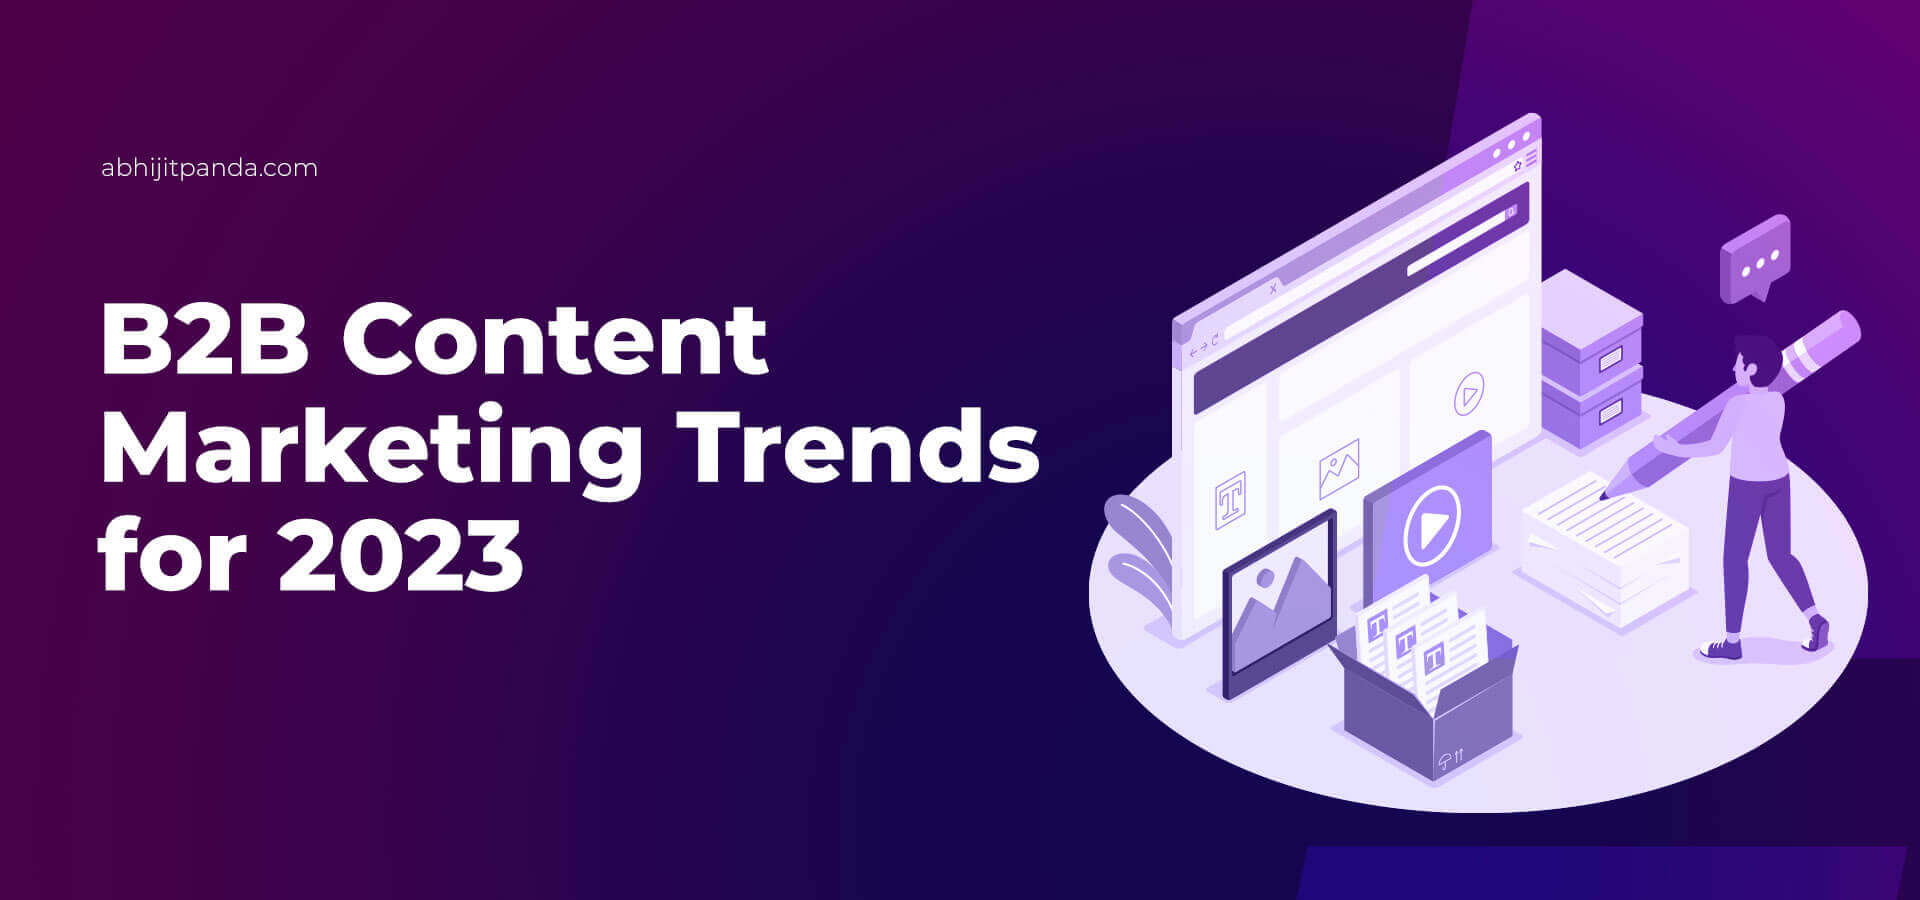 B2B content marketing trends for 2023